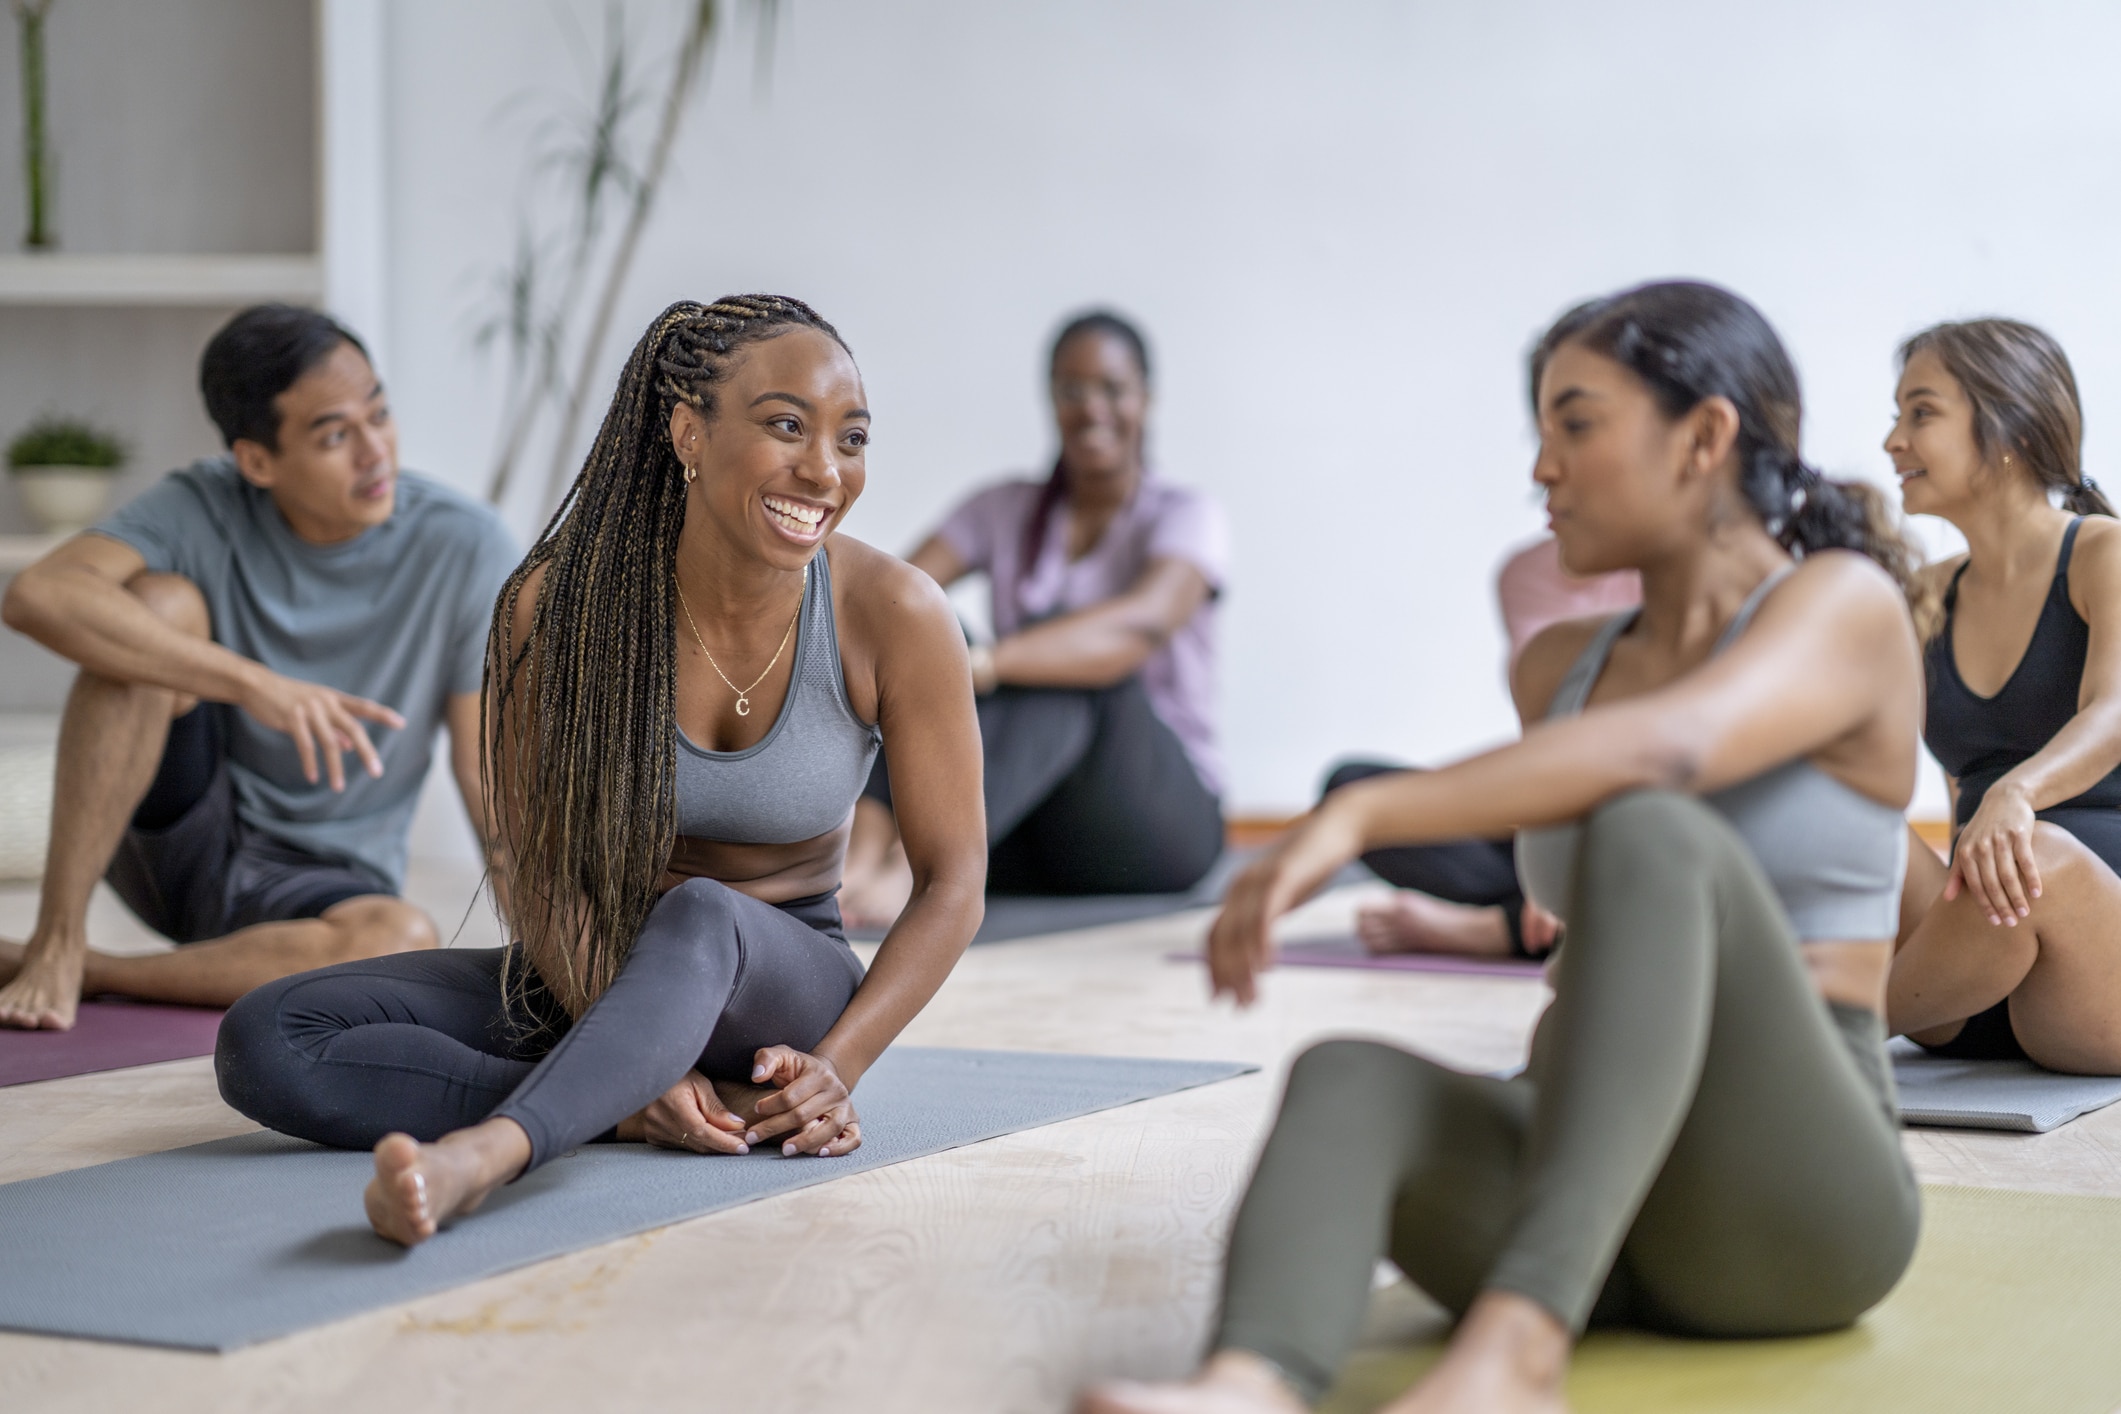 A small group of mature adults sit on individual yoga mats as they take a break after their fitness class. They are each dressed casually in athletic wear and are smiling as they talk amongst themselves.